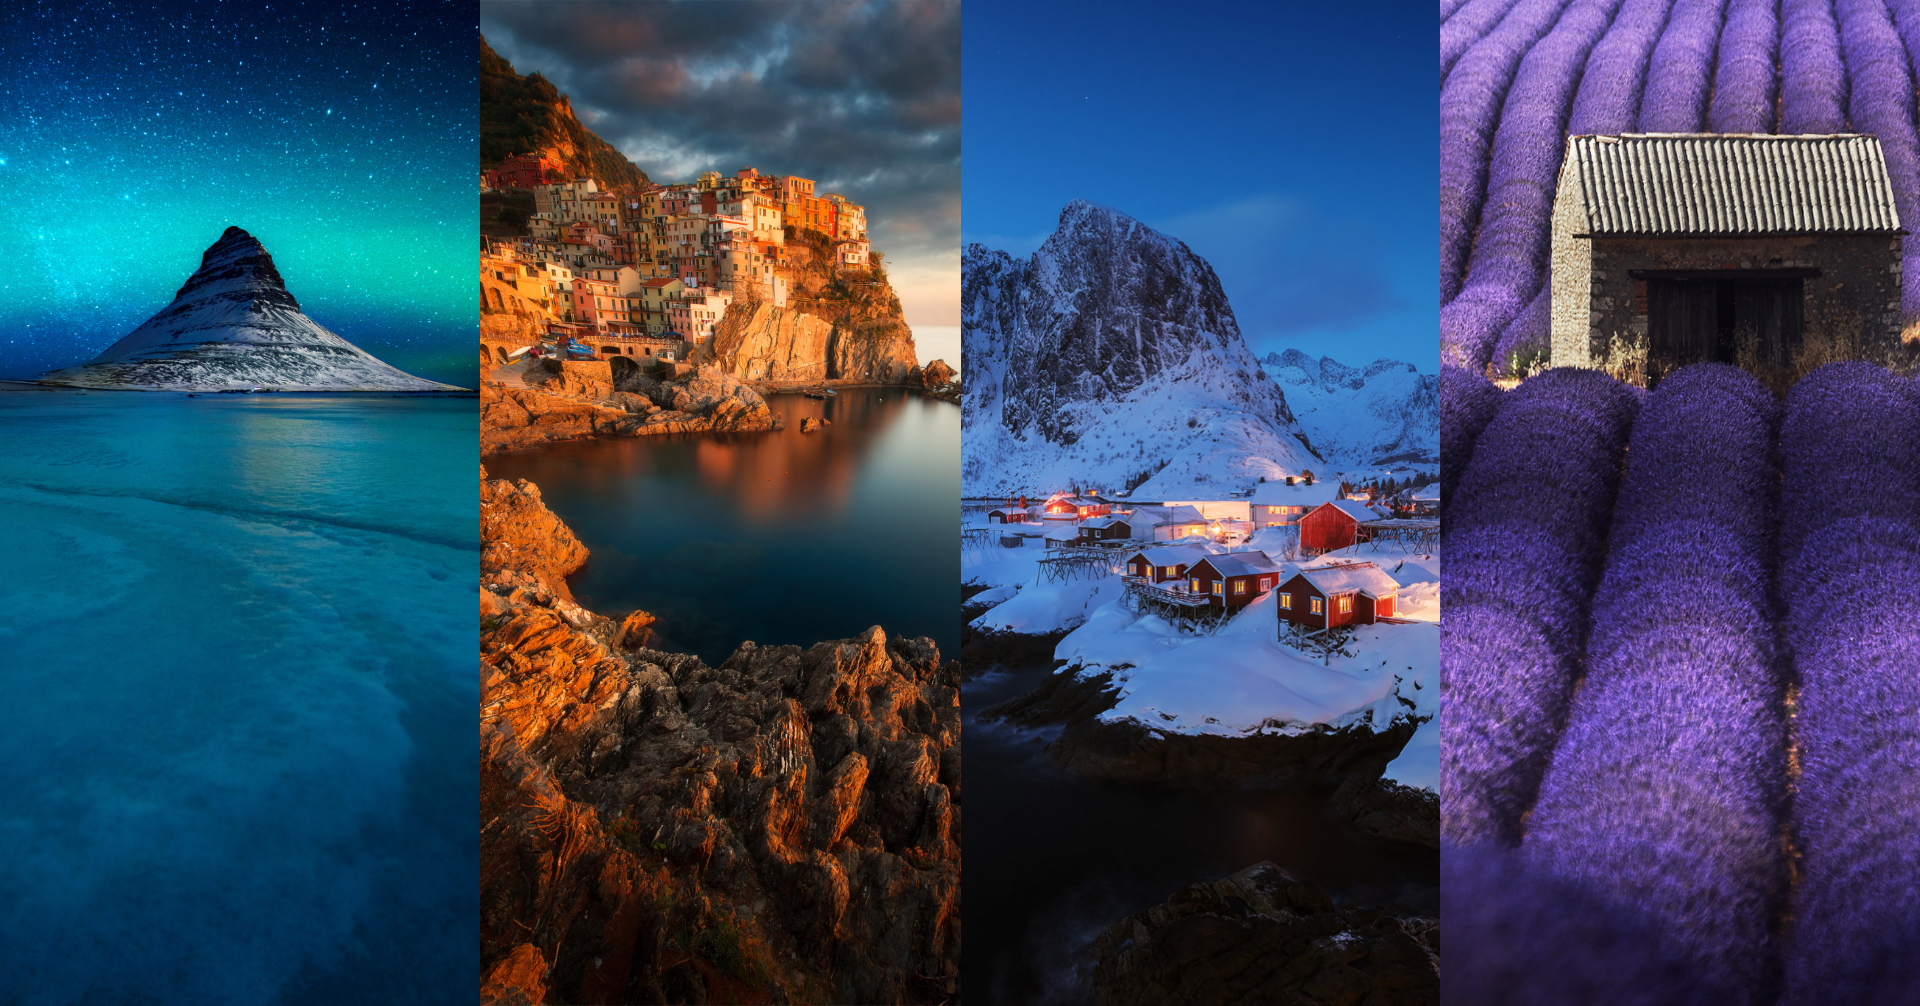 The Most Popular Destinations for Photography Around the World